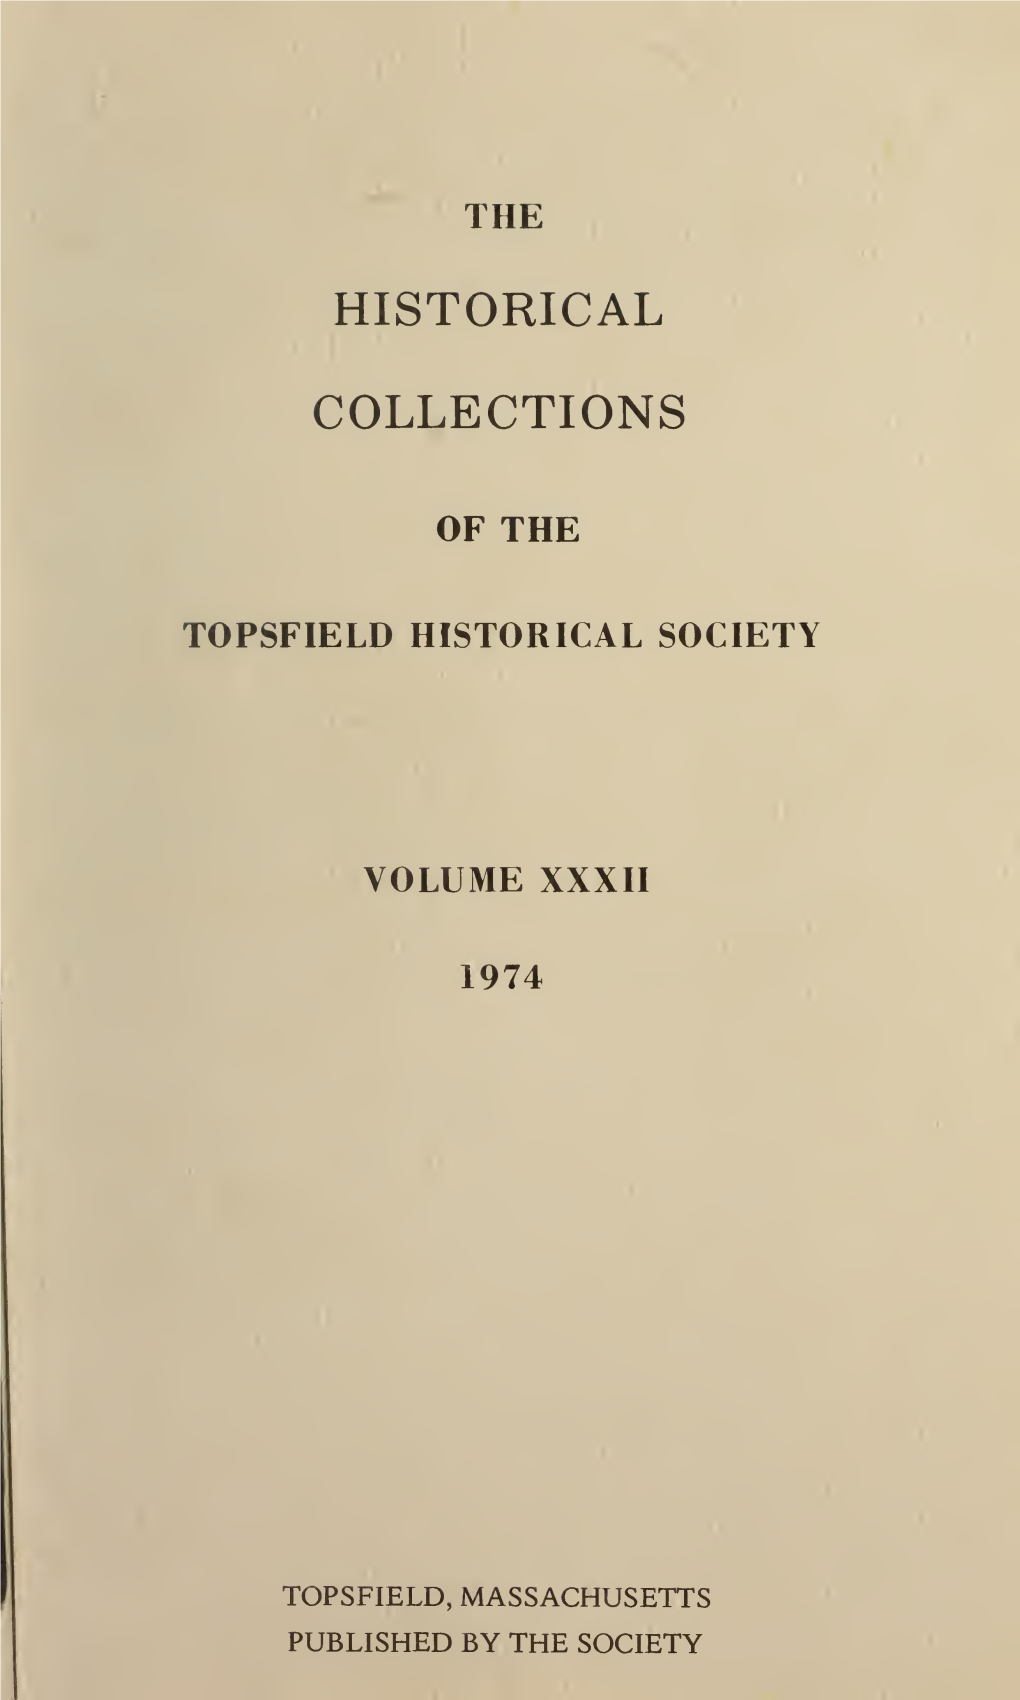 HISTORICAL COLLECTIONS of the Topsfield Historical Society